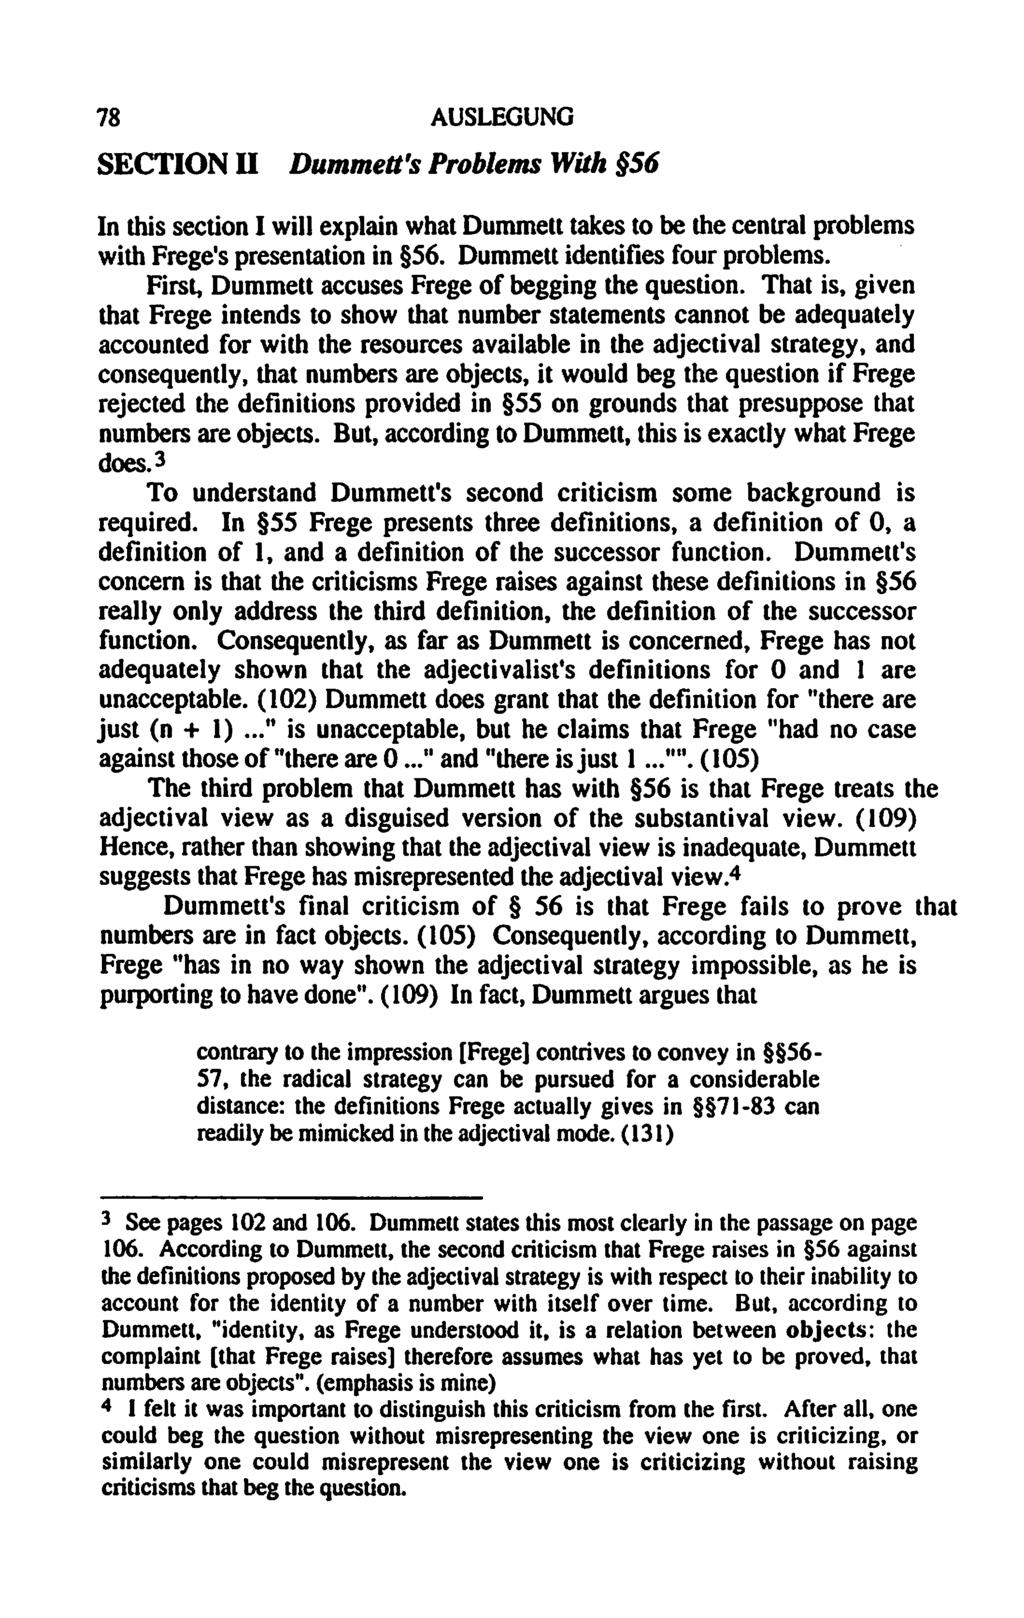 78 AUSLEGUNG SECTION II Dummett's Problems With 56 In this section I will explain what Dummett takes to be the central problems with Frege's presentation in 56. Dummett identifies four problems.